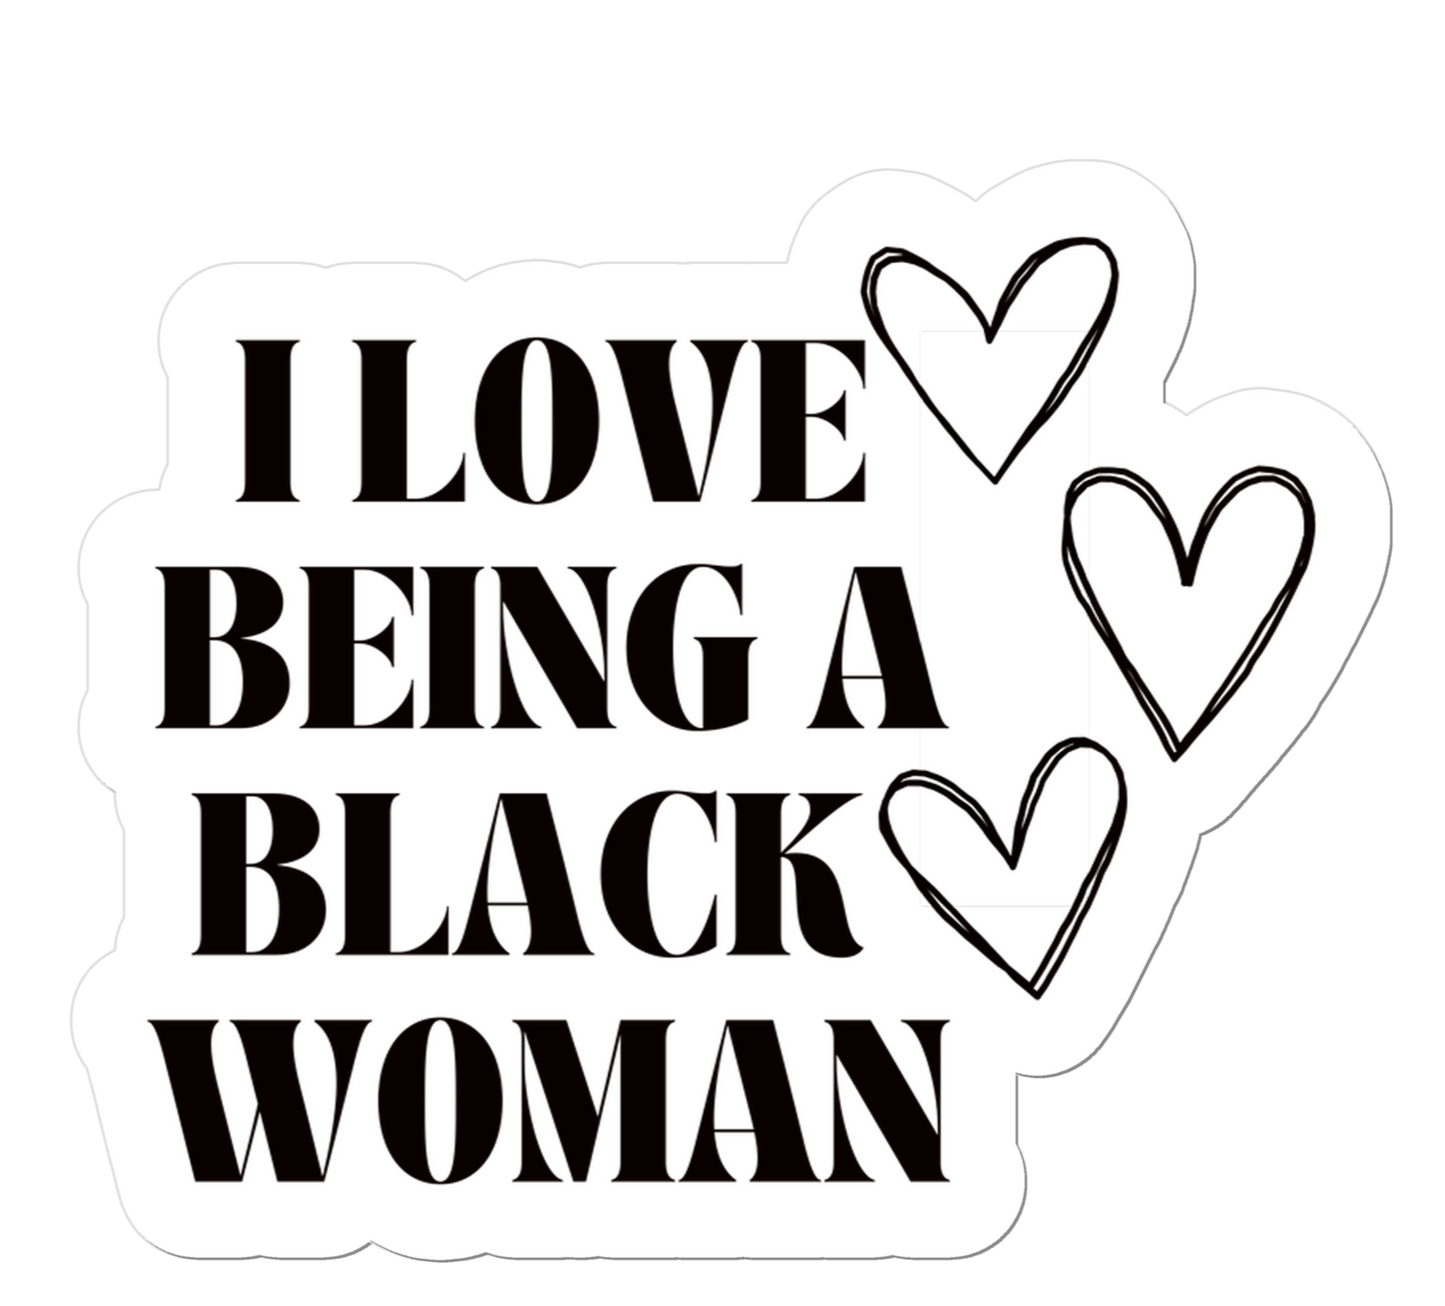 I Love being a Black Woman